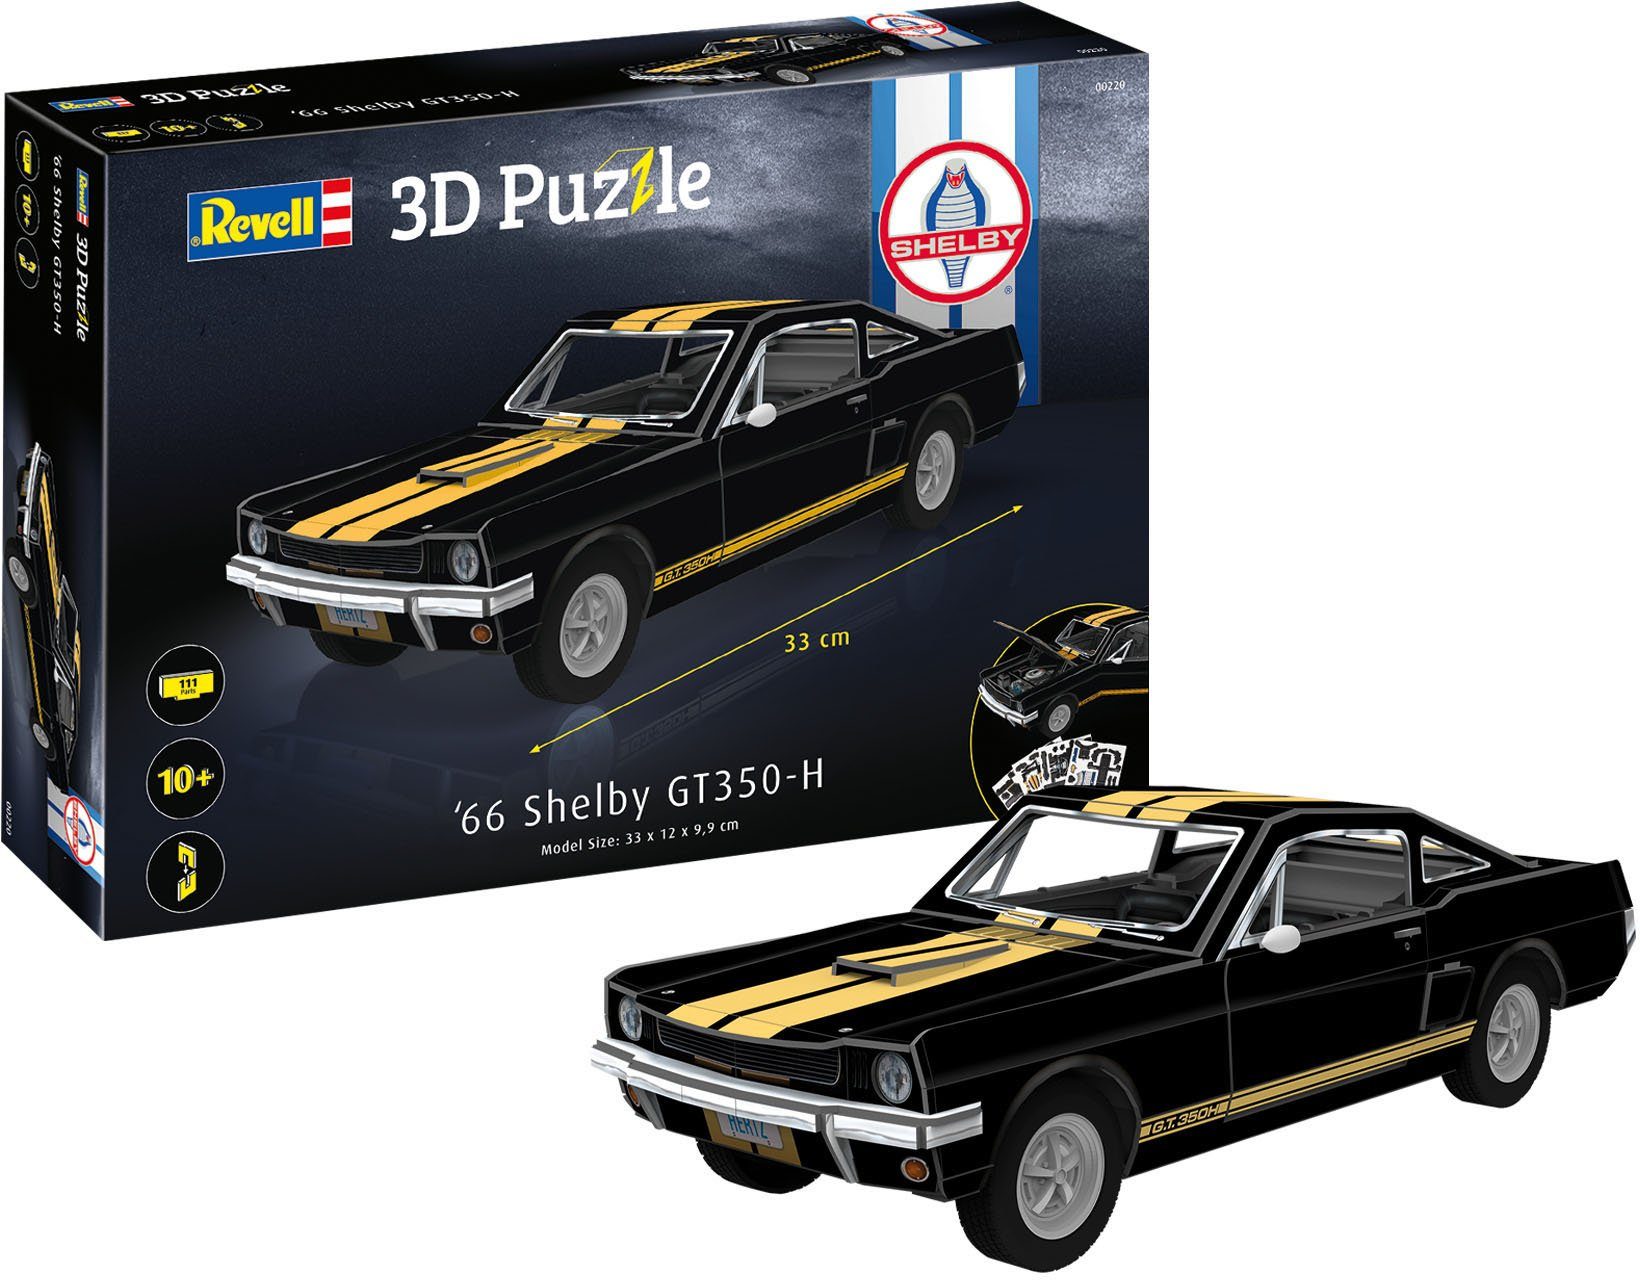 Revell® 3D-Puzzle 66 Shelby GT350-H, 111 Puzzleteile